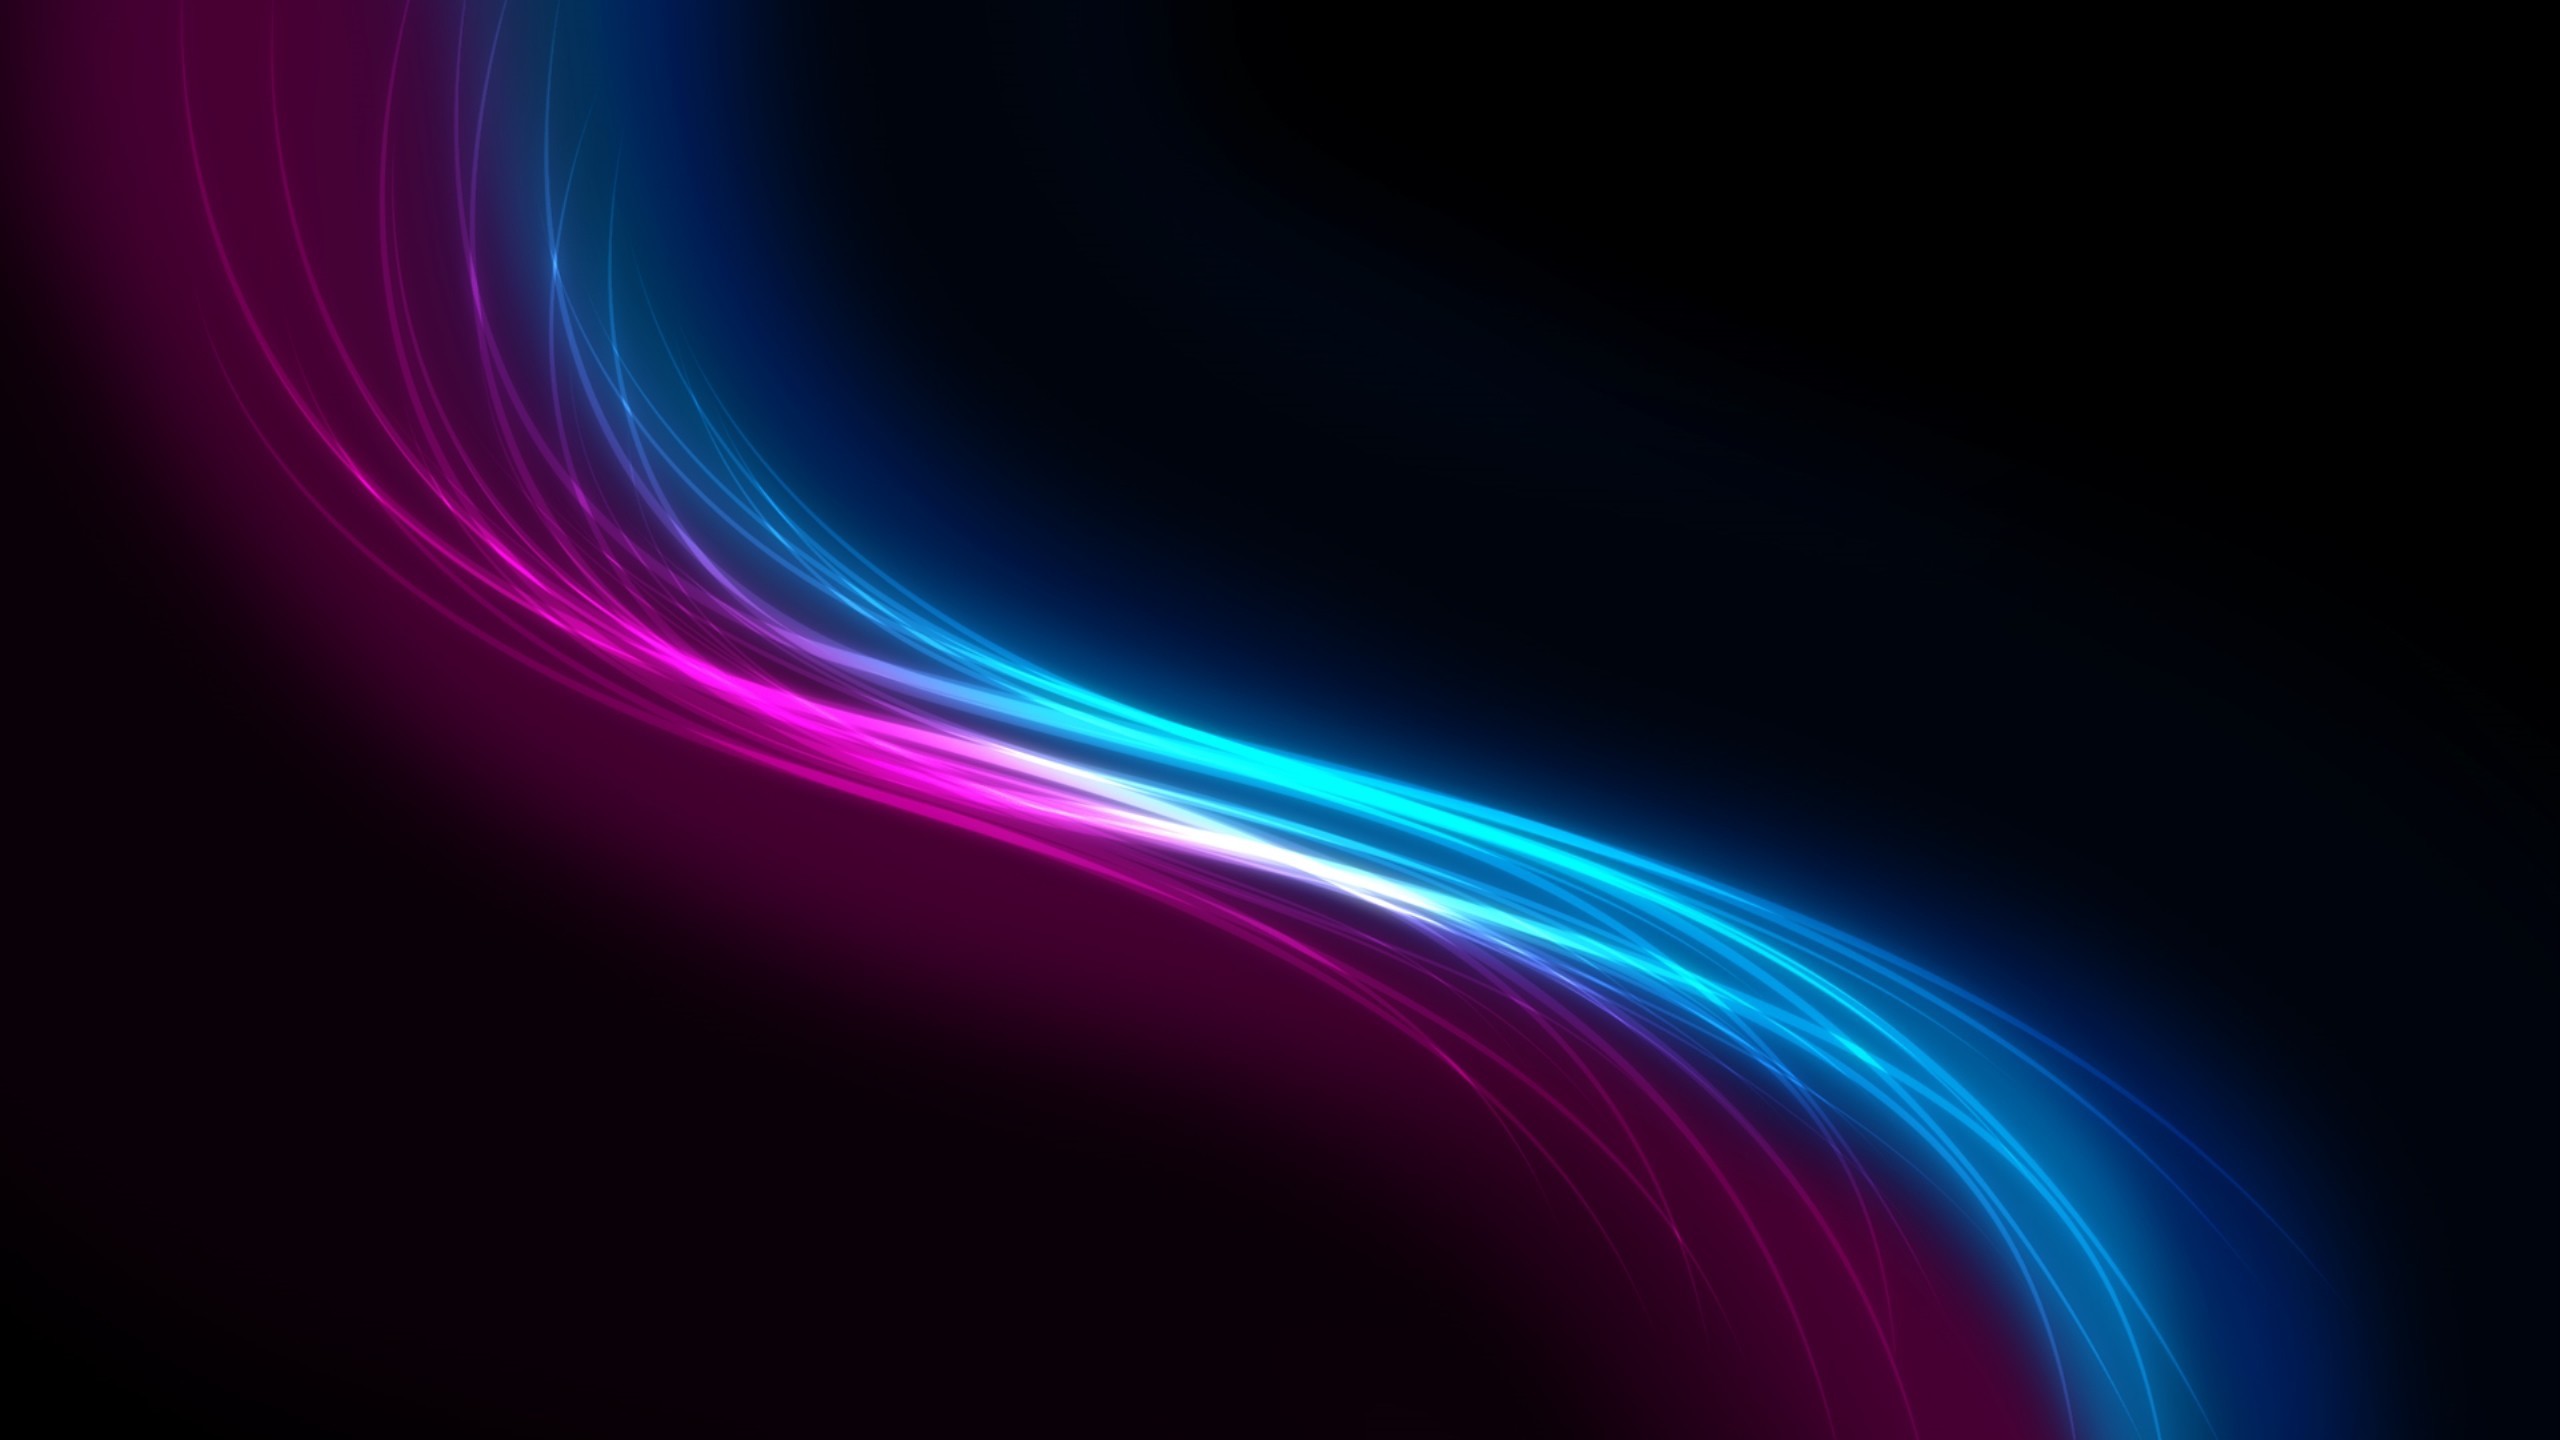 2560x1440 Siluet black pink and blue light abstract | HD Wallpapers